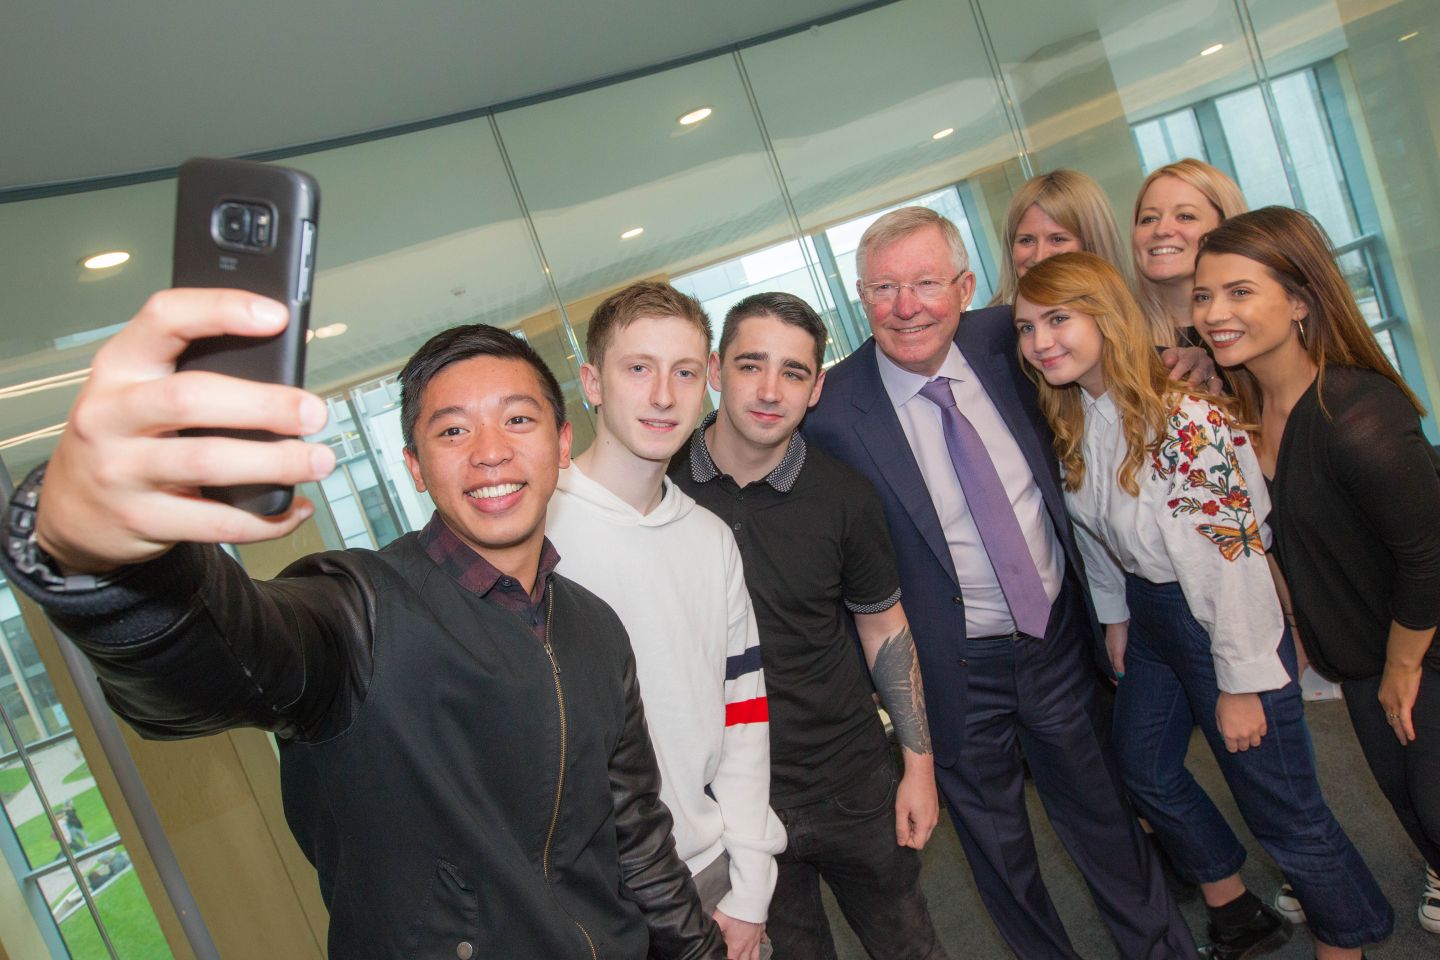 A group of Common Good Scholarship recipients with Sir Alex Ferguson and one of them is taking a selfie of the group.